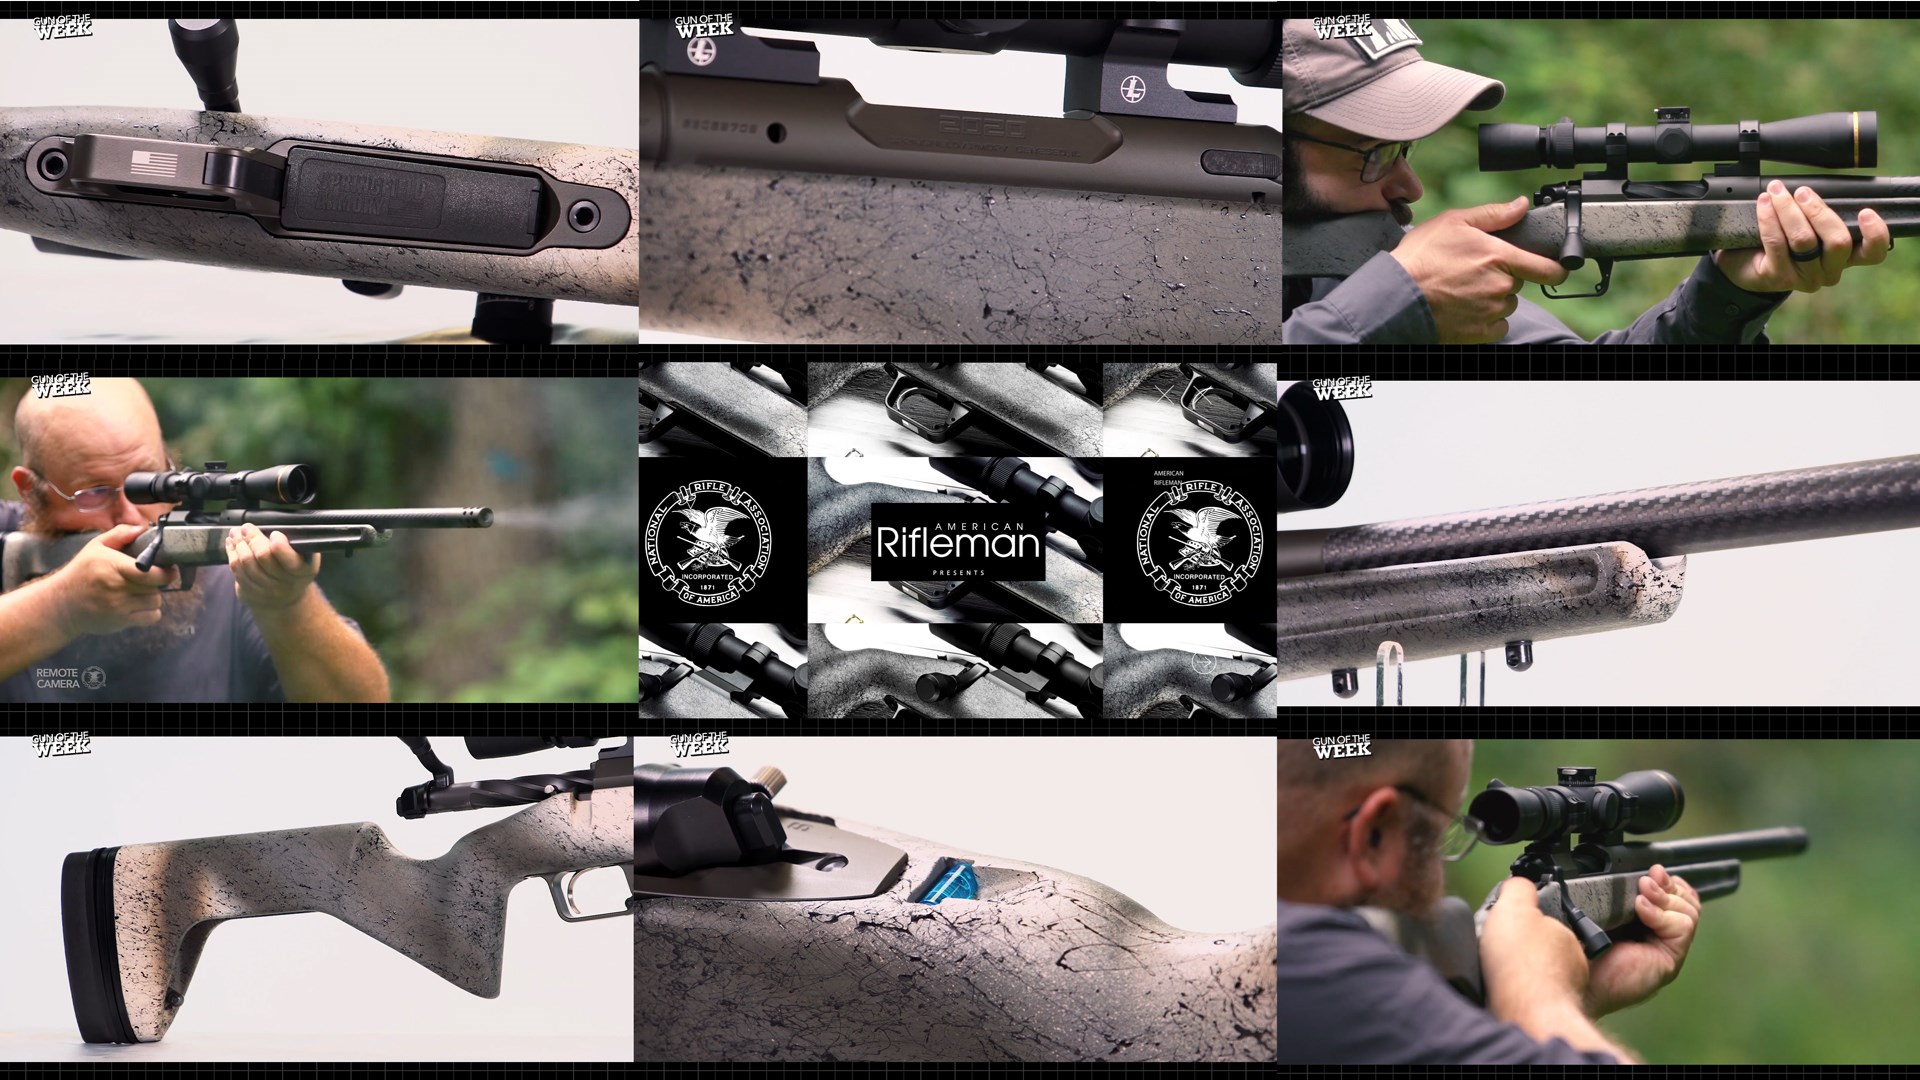 Springfield Armory GOTW gun of the week Model 2020 Redline bolt-action rifle detail images tiles 9 images stack arrangement men shooting outdoors closeup hunting rifle camo